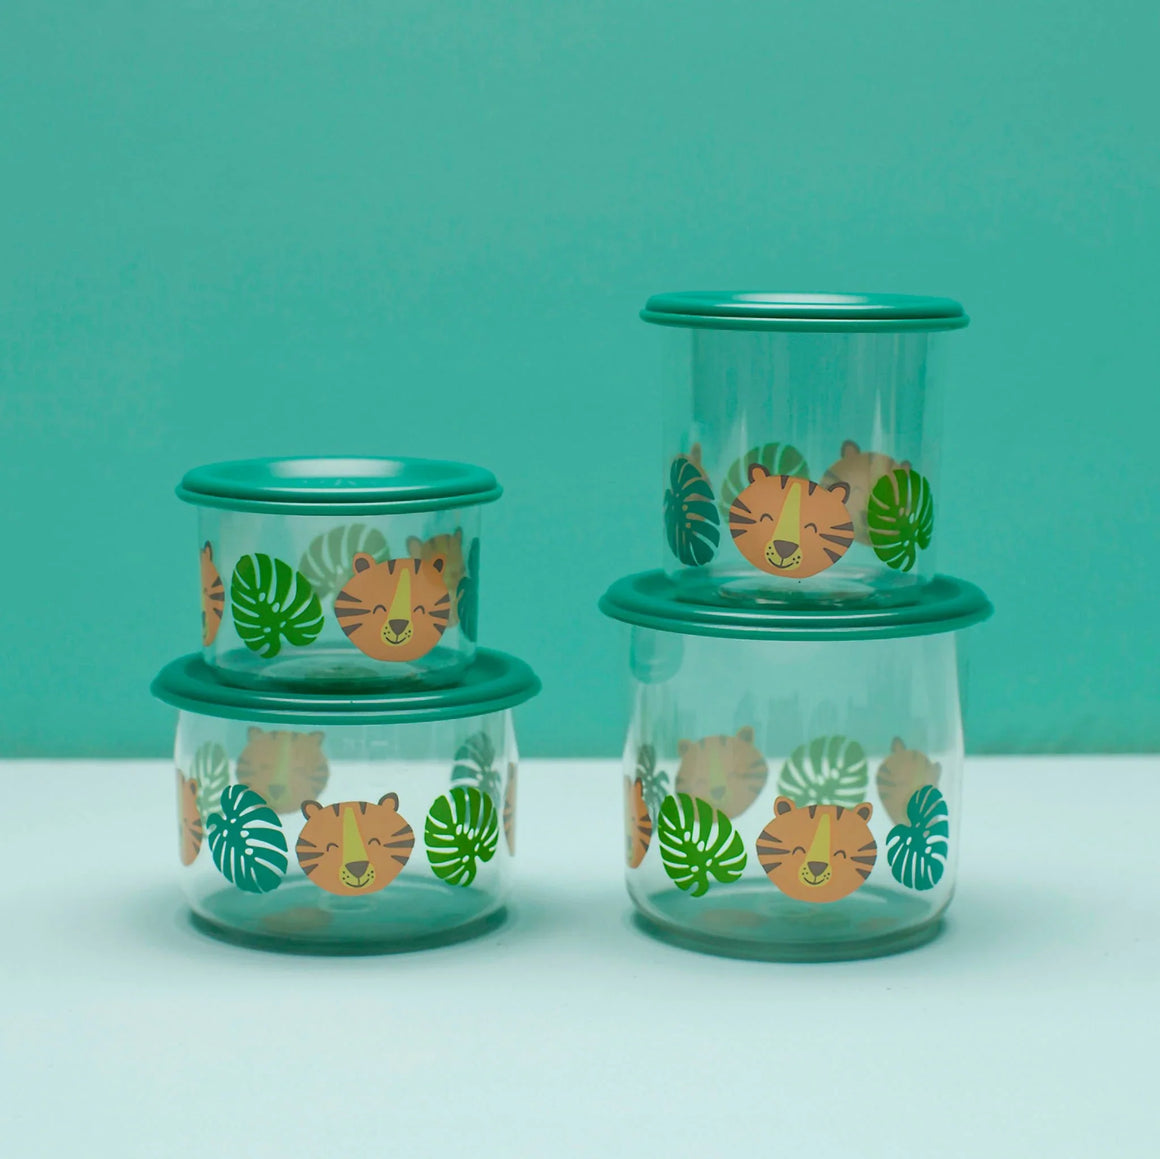 Tiger - Good Lunch Containers - Large 2 pcs